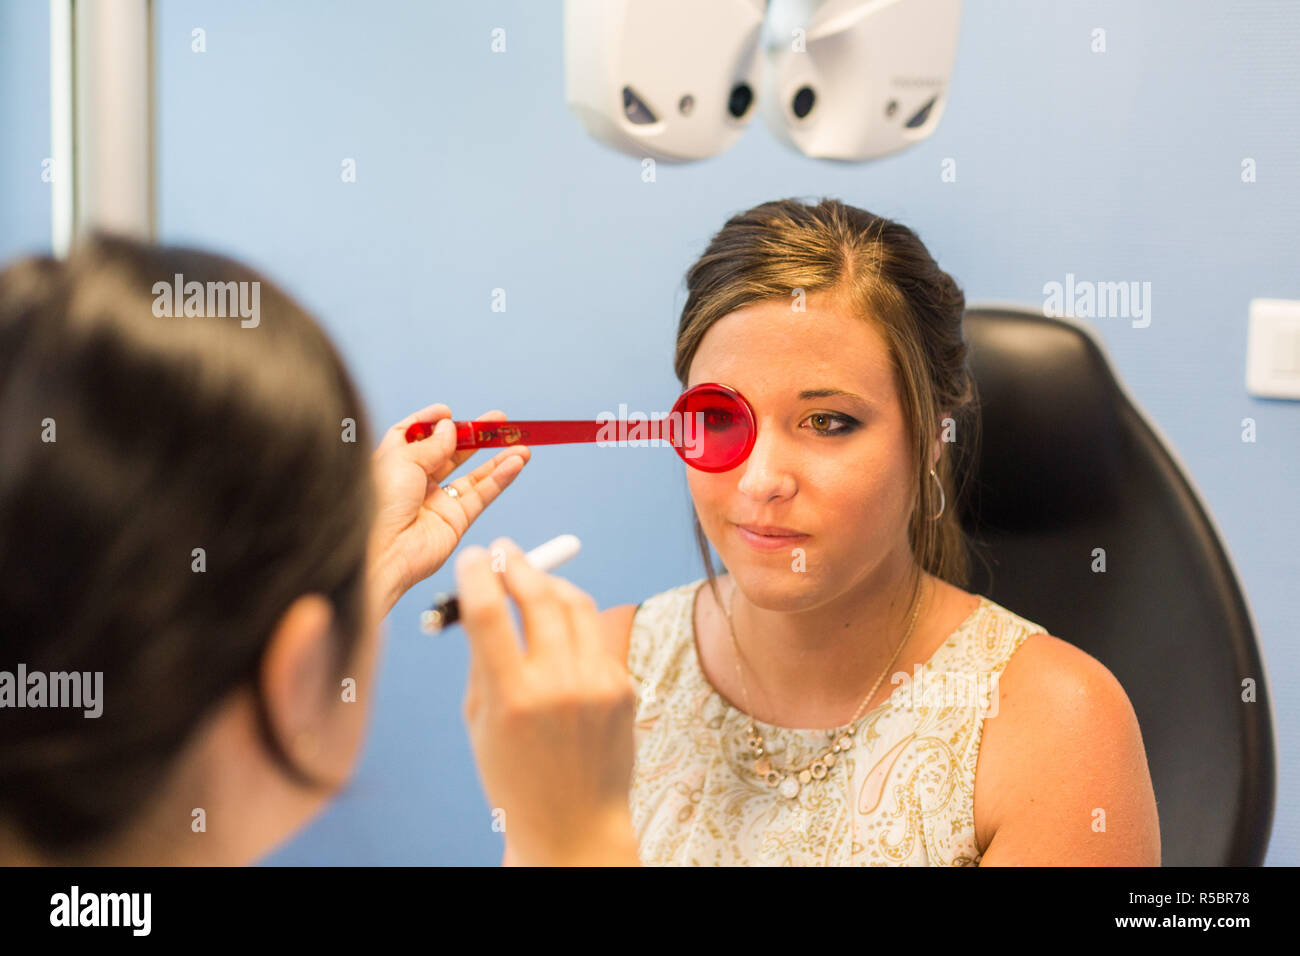 Woman undergoing orthoptic check-up with an orthoptist, France. Stock Photo